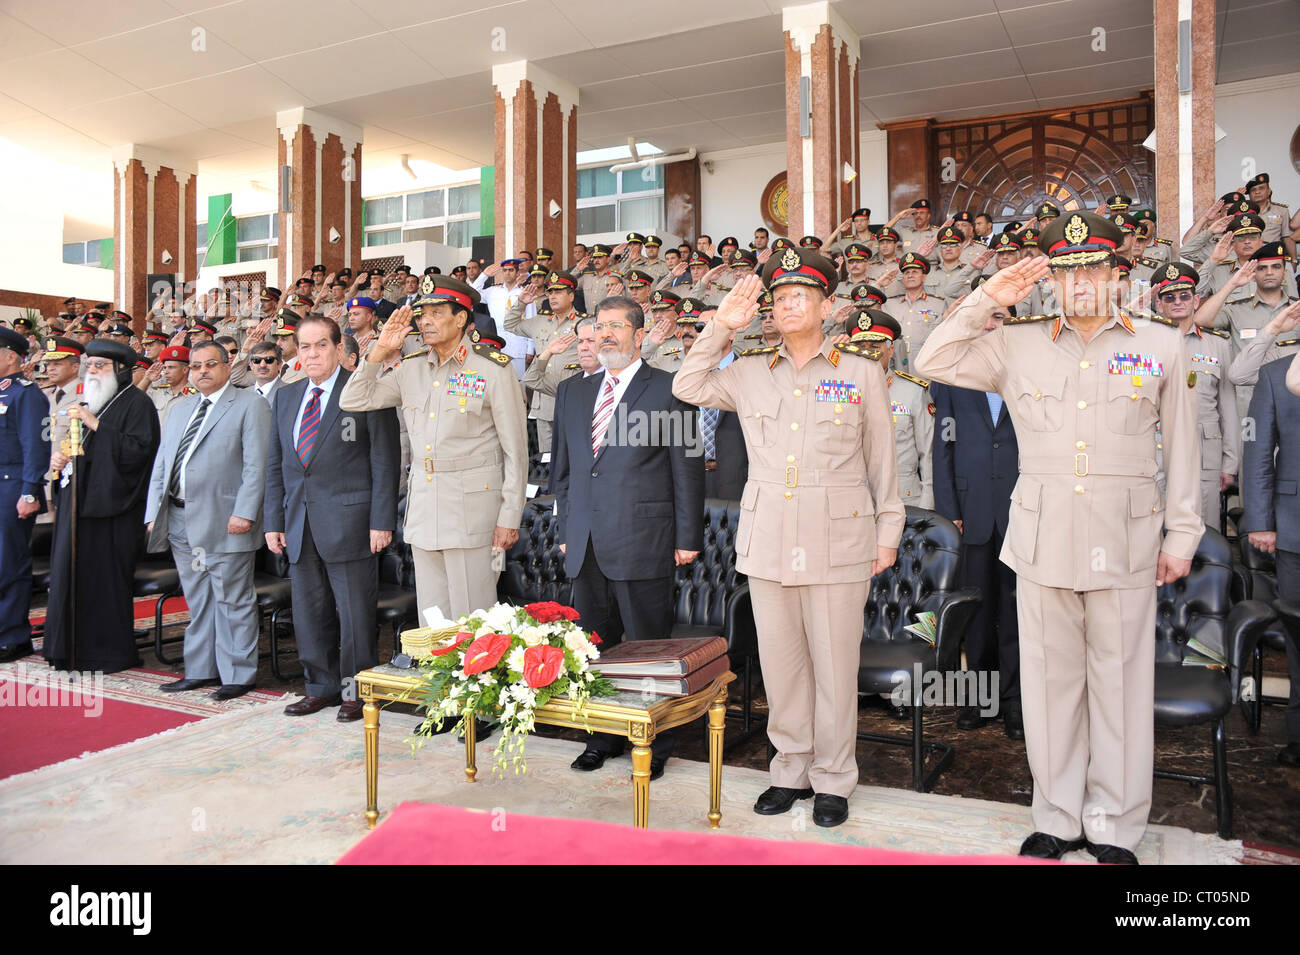 Egypt's President Morsi attends Civil Aviation graduation cermonies with Military head Hussein Tantawi and other senior figures. Stock Photo